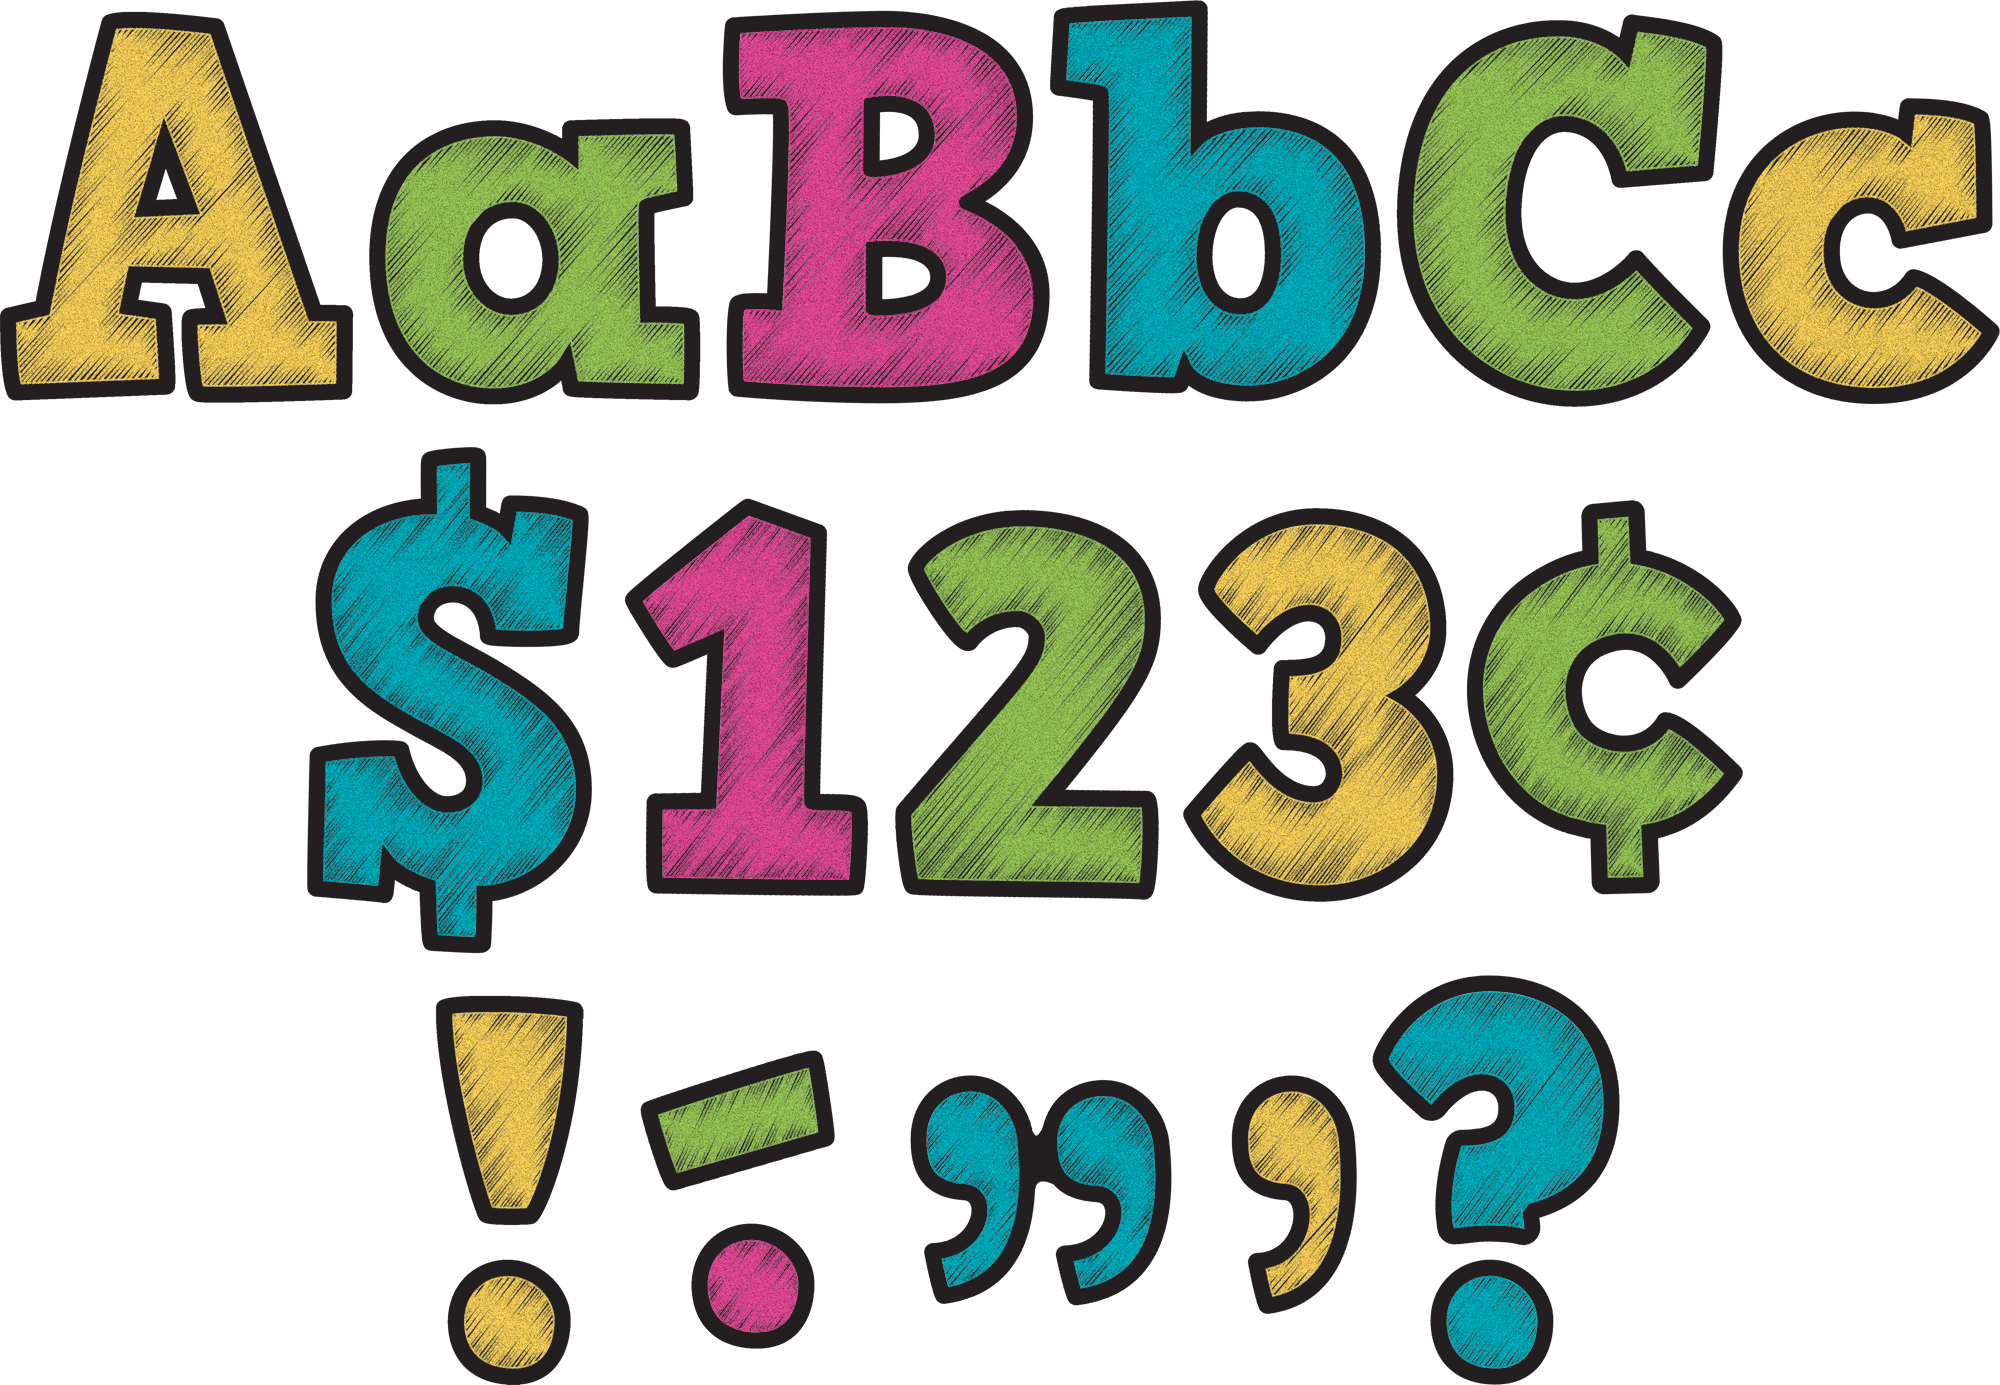 Chalkboard Brights Bold Block 4 Letters Combo Pack - TCR5617